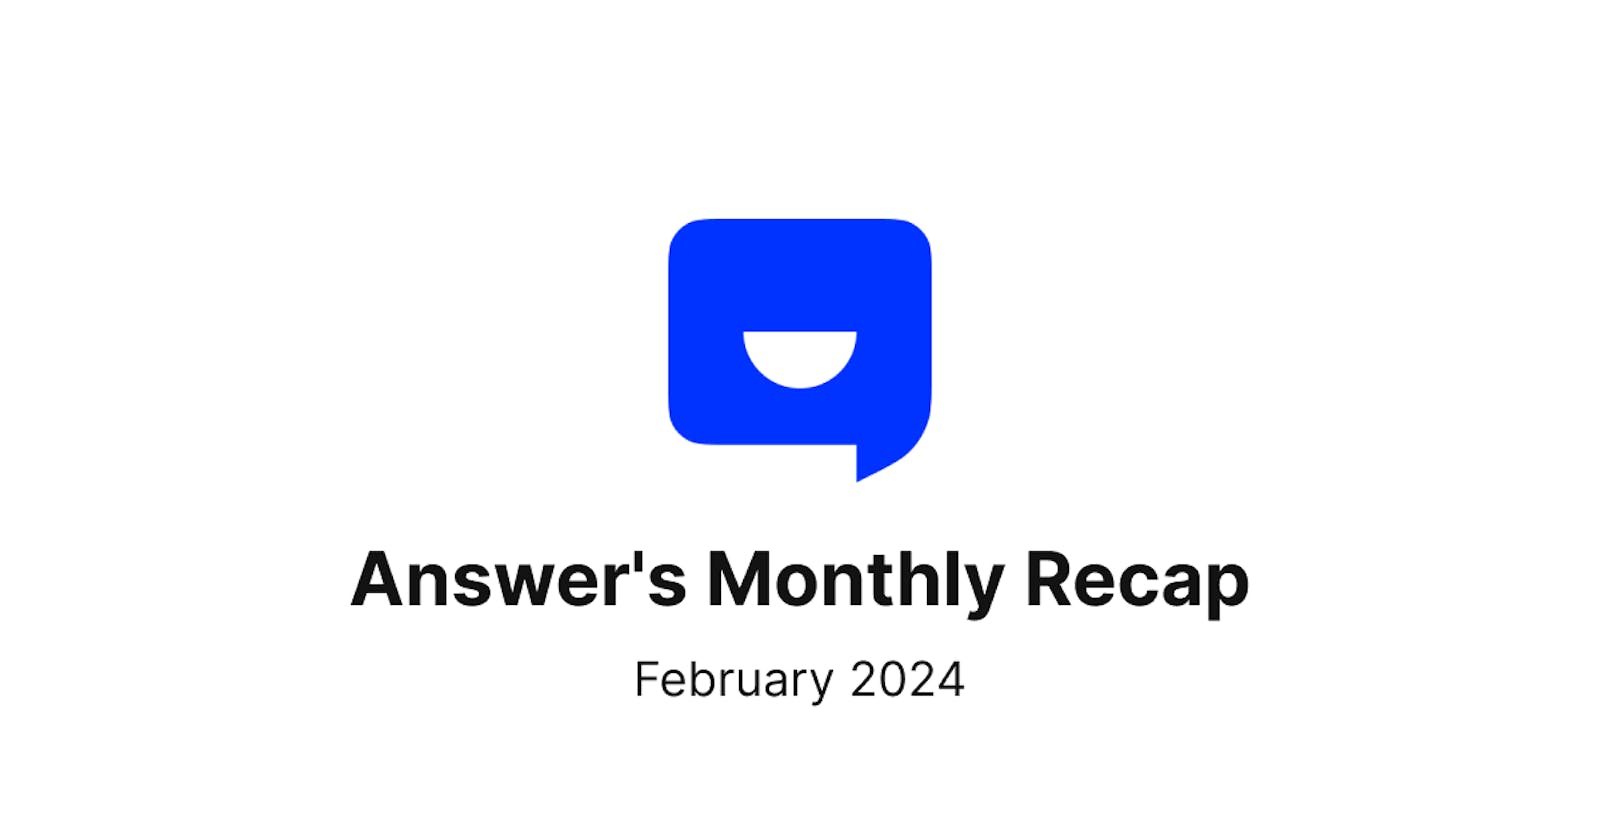 February 2024 Recap for Answer